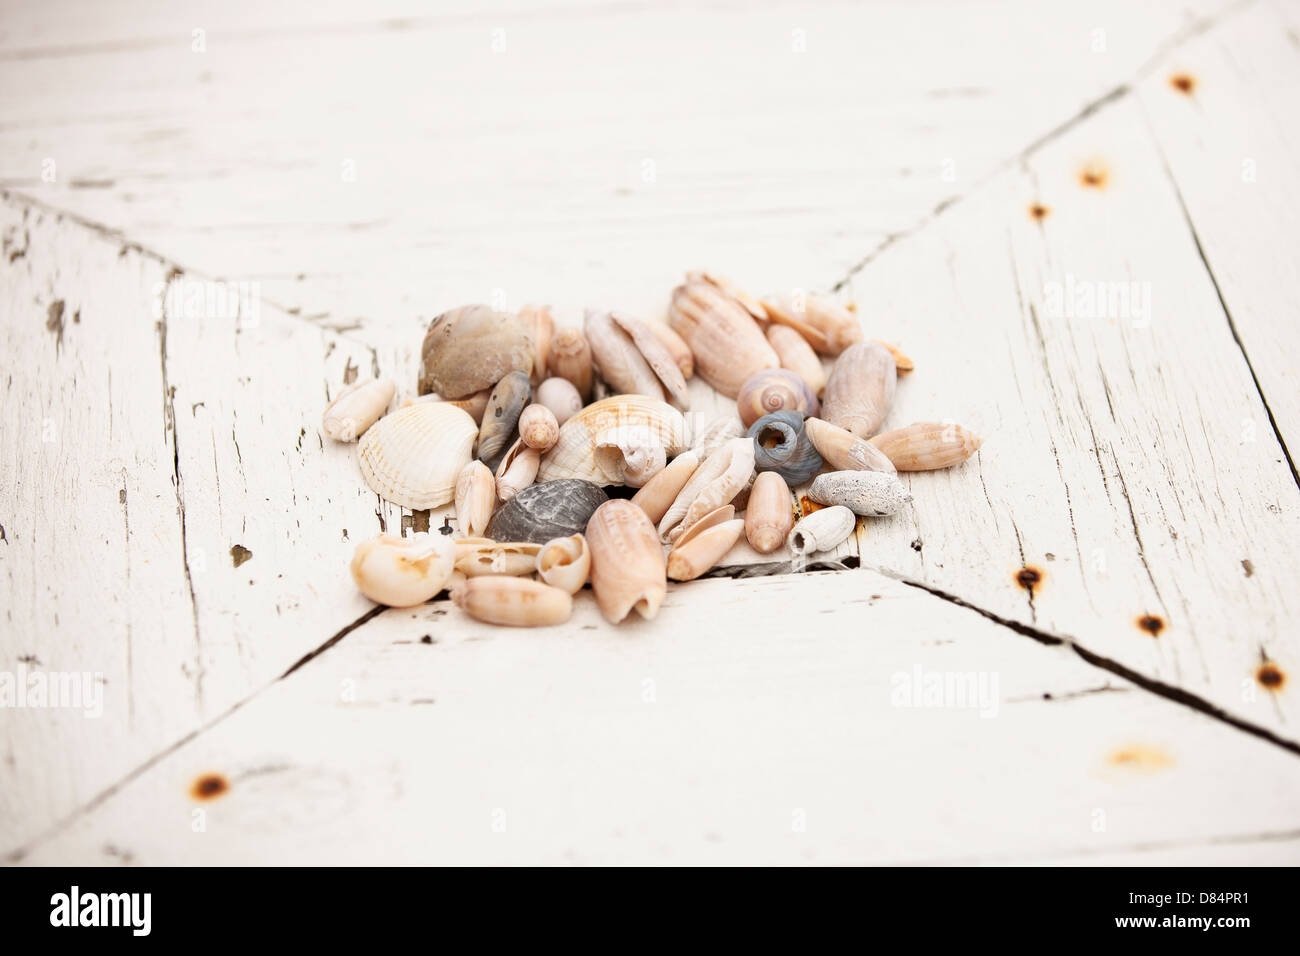 Group of sea shells resting on table Stock Photo